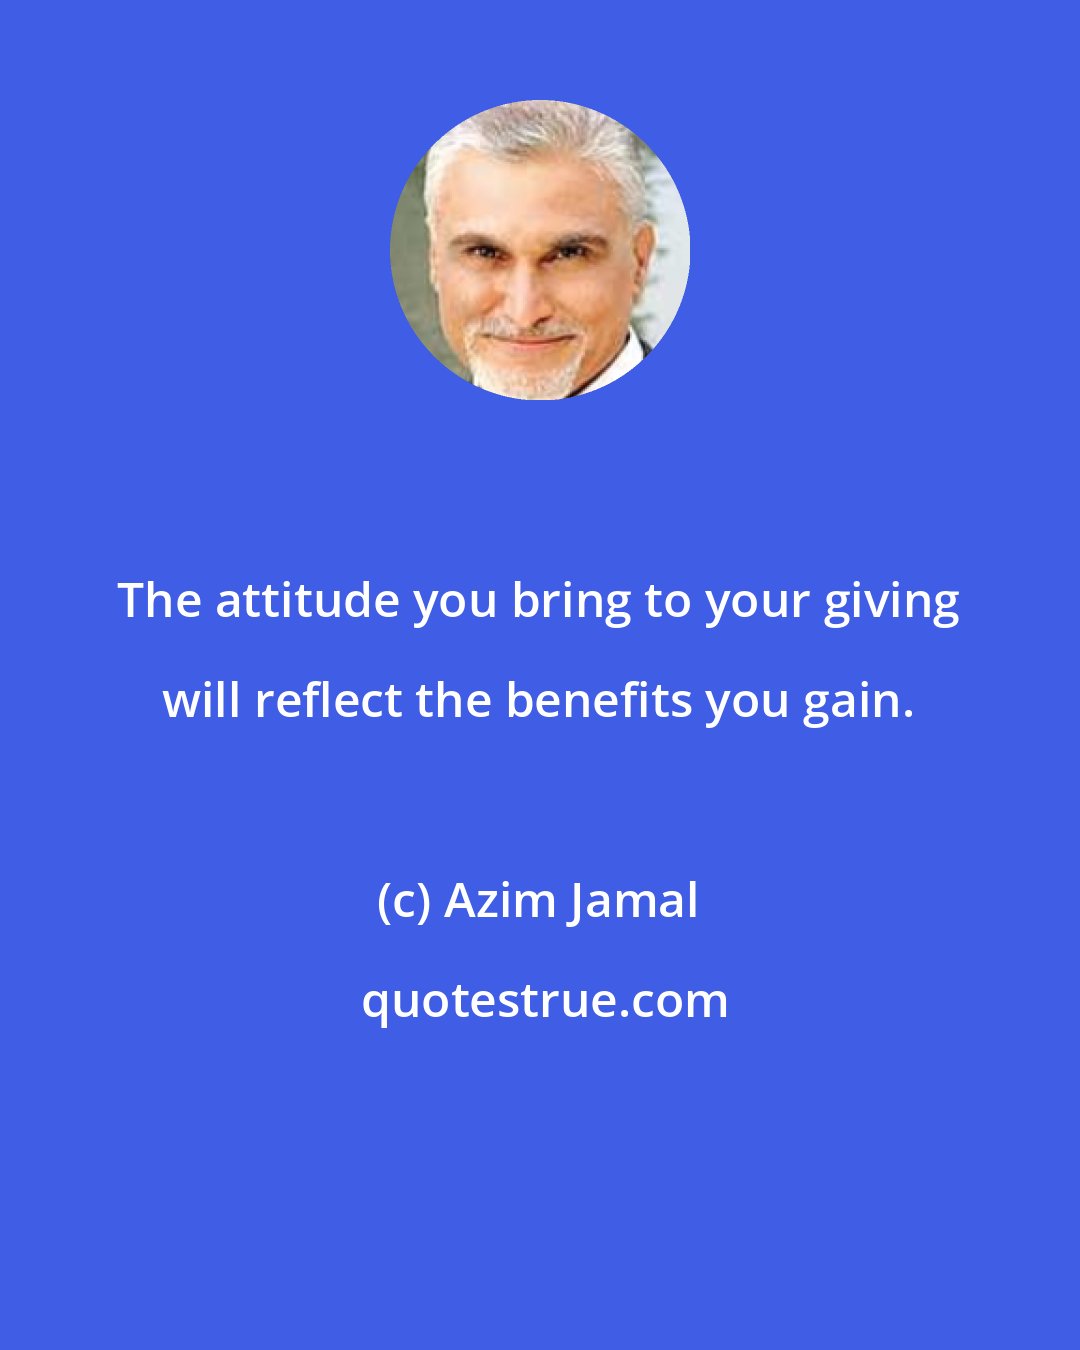 Azim Jamal: The attitude you bring to your giving will reflect the benefits you gain.